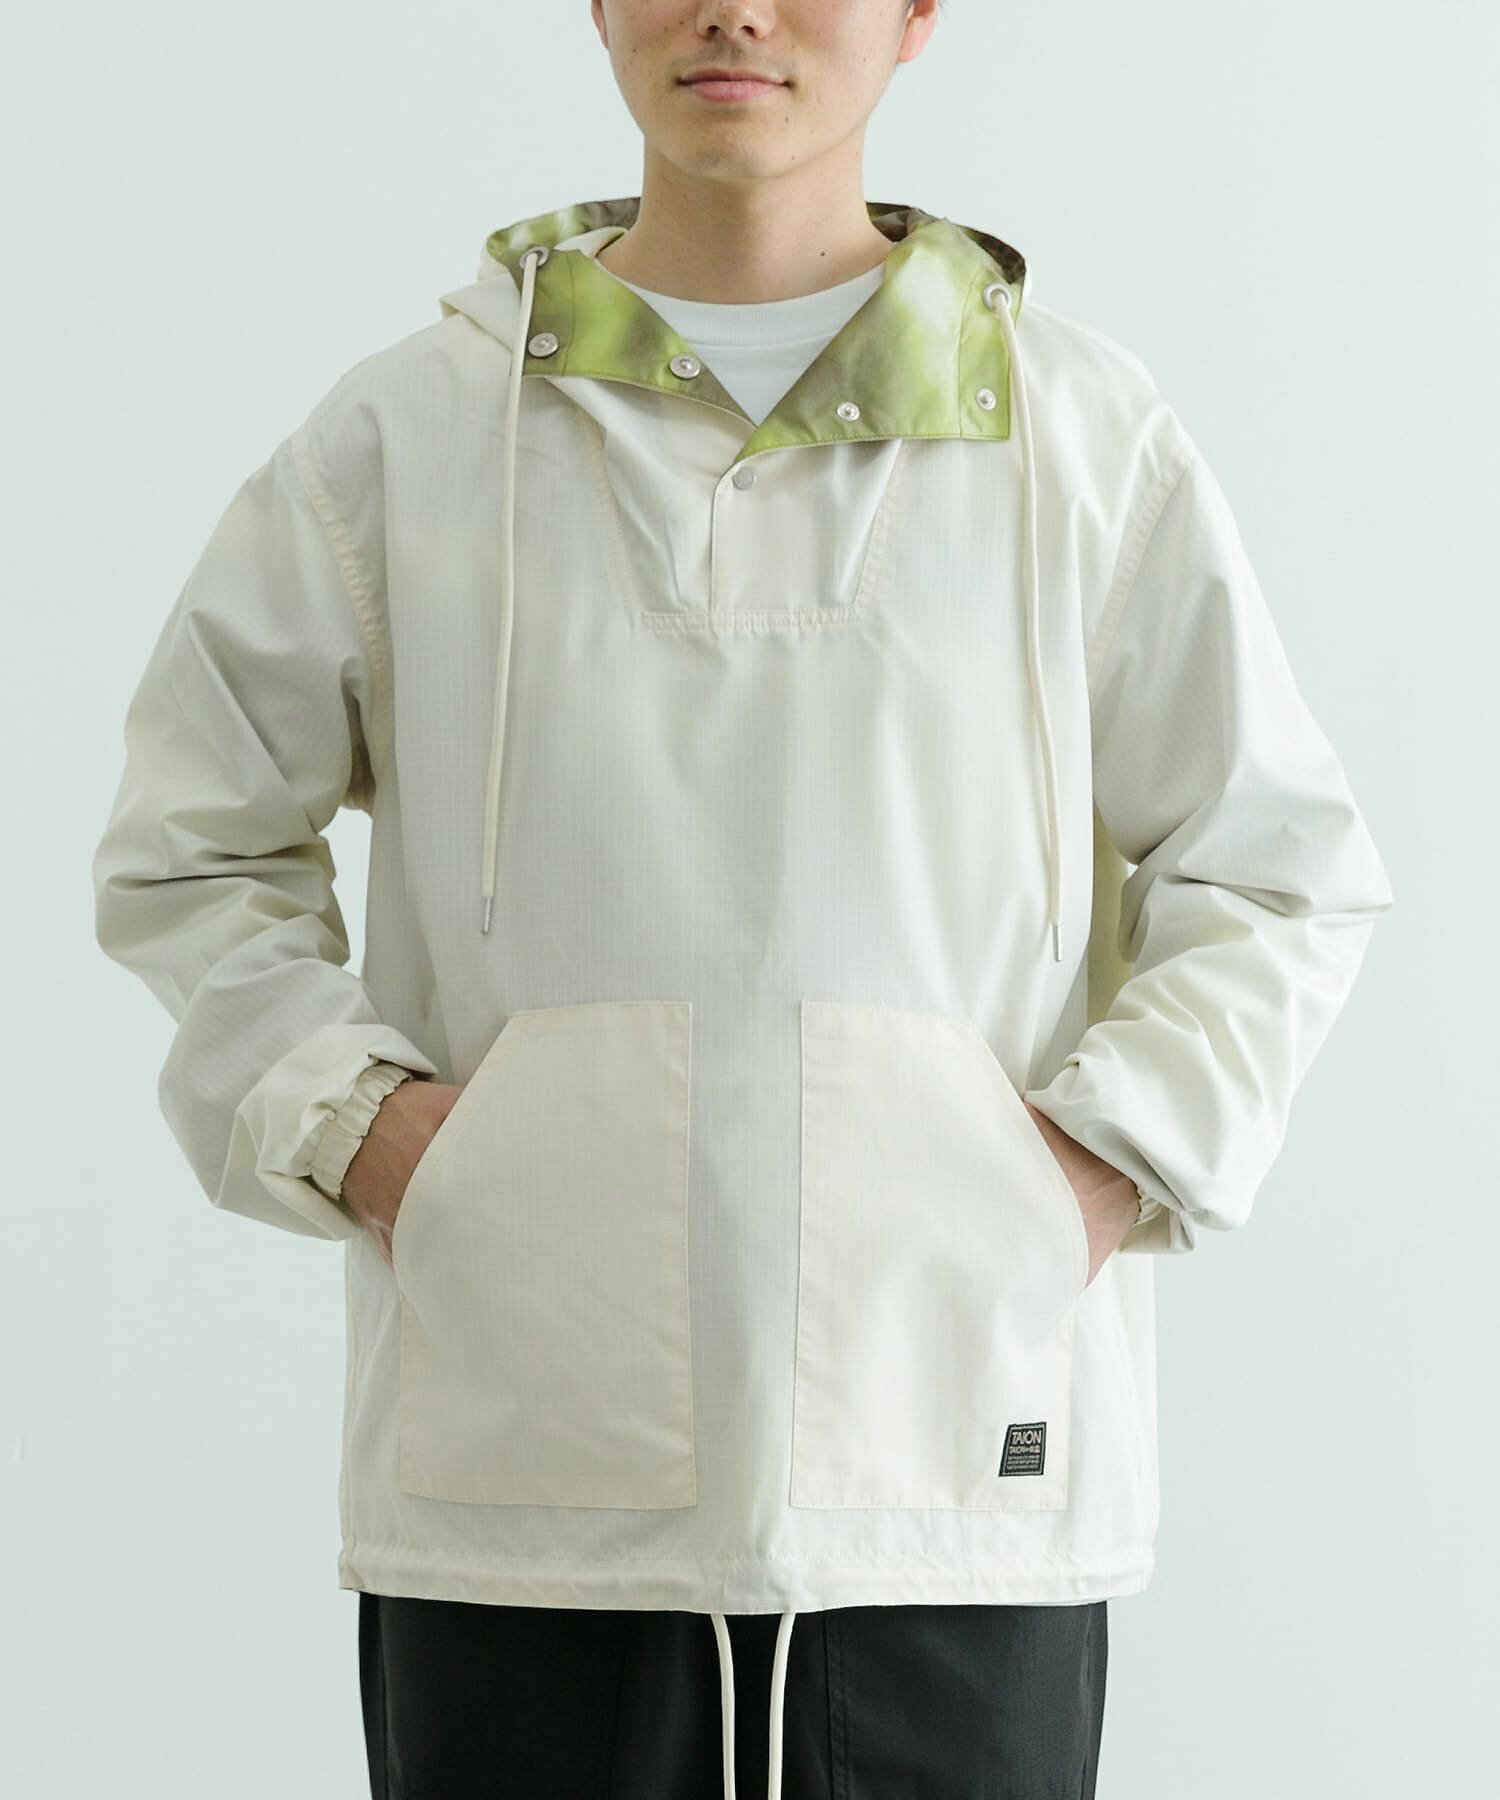 TAION Military Reversible Anorak